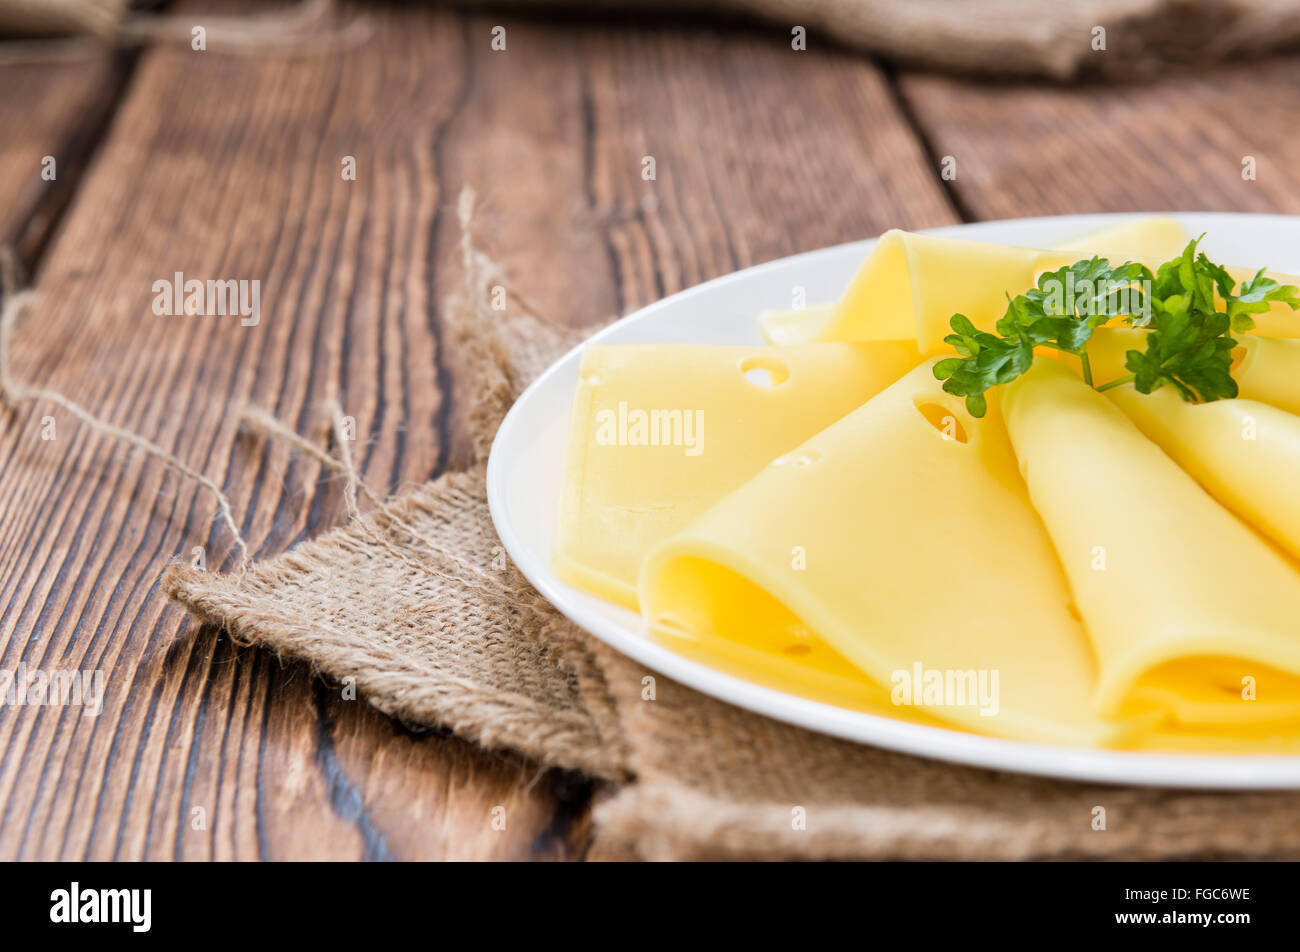 Sliced Cheese on rustic wooden background (close-up shot) Stock Photo